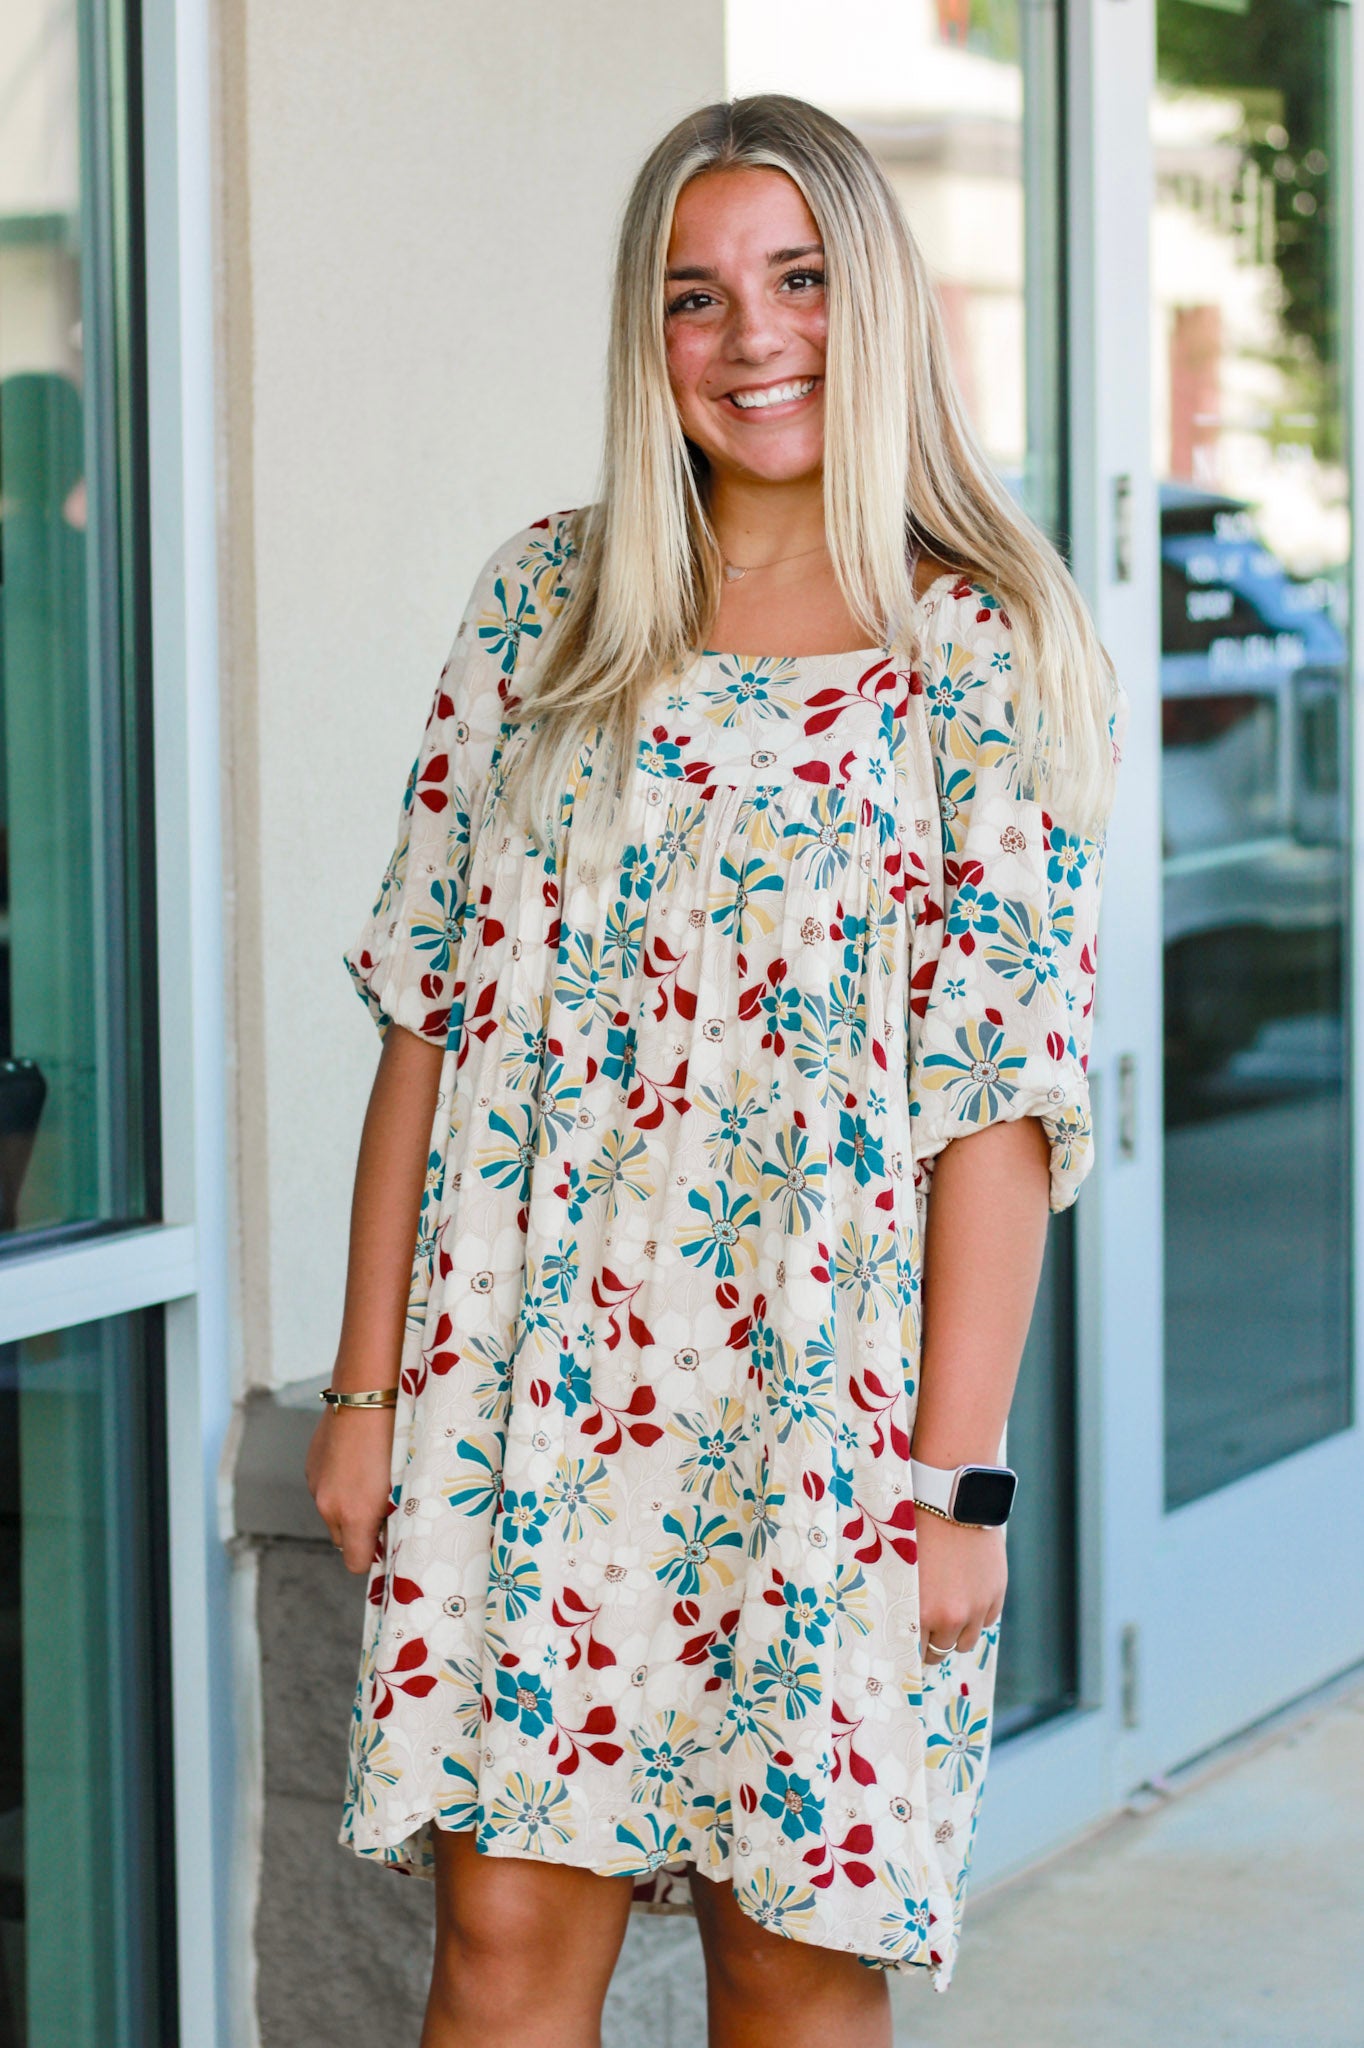 Fun For All Fall Floral Dress